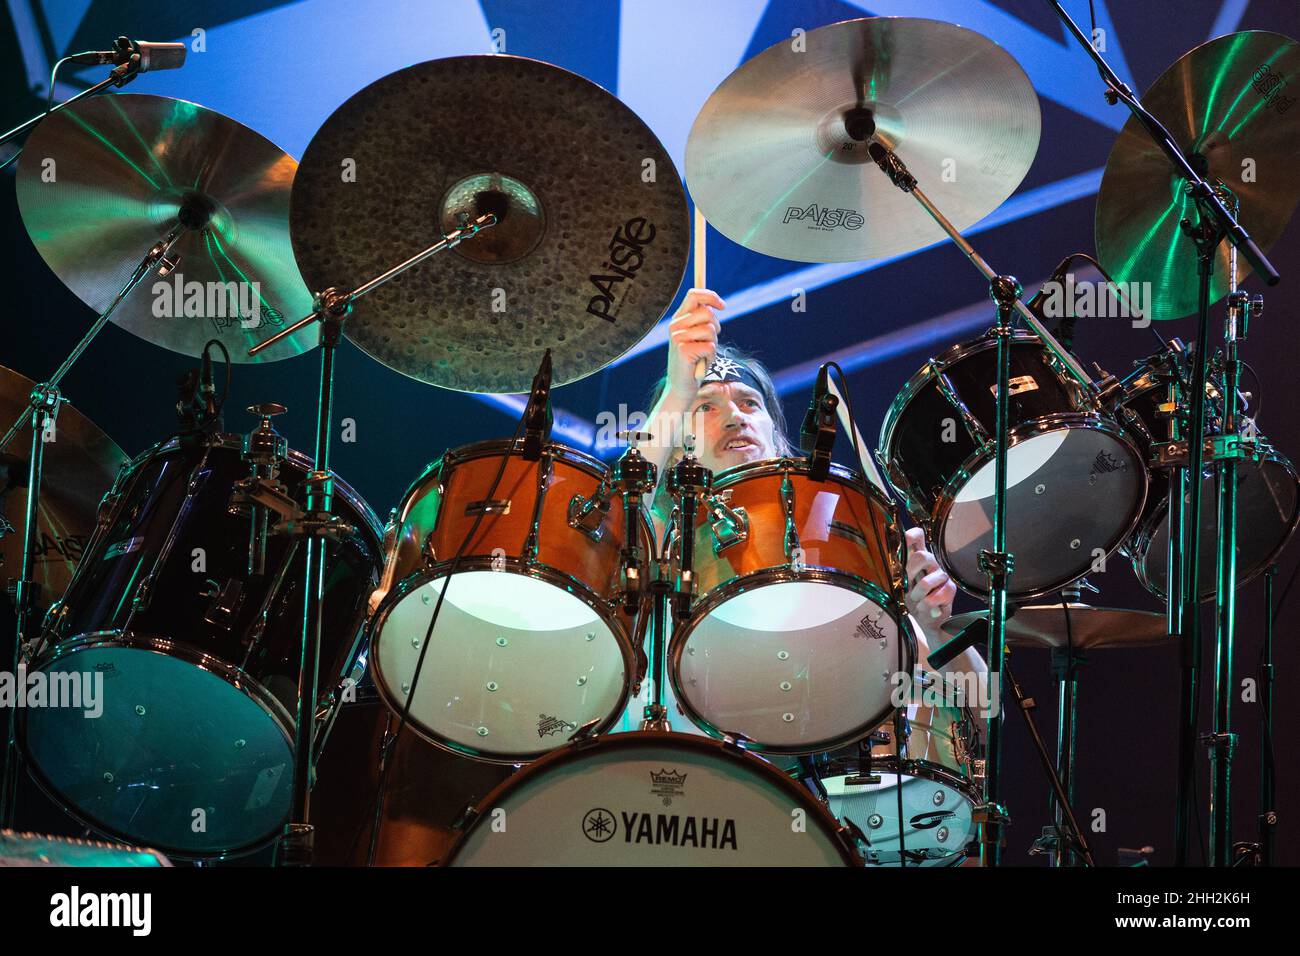 Oslo, Norway. 21st, January 2021. The Norwegian blues rock band Spidergawd performs a live concert during at Rockefeller in Oslo. Here drummer Kenneth Kapstad is seen live on stage. (Photo credit: Gonzales Photo - Per-Otto Oppi). Stock Photo